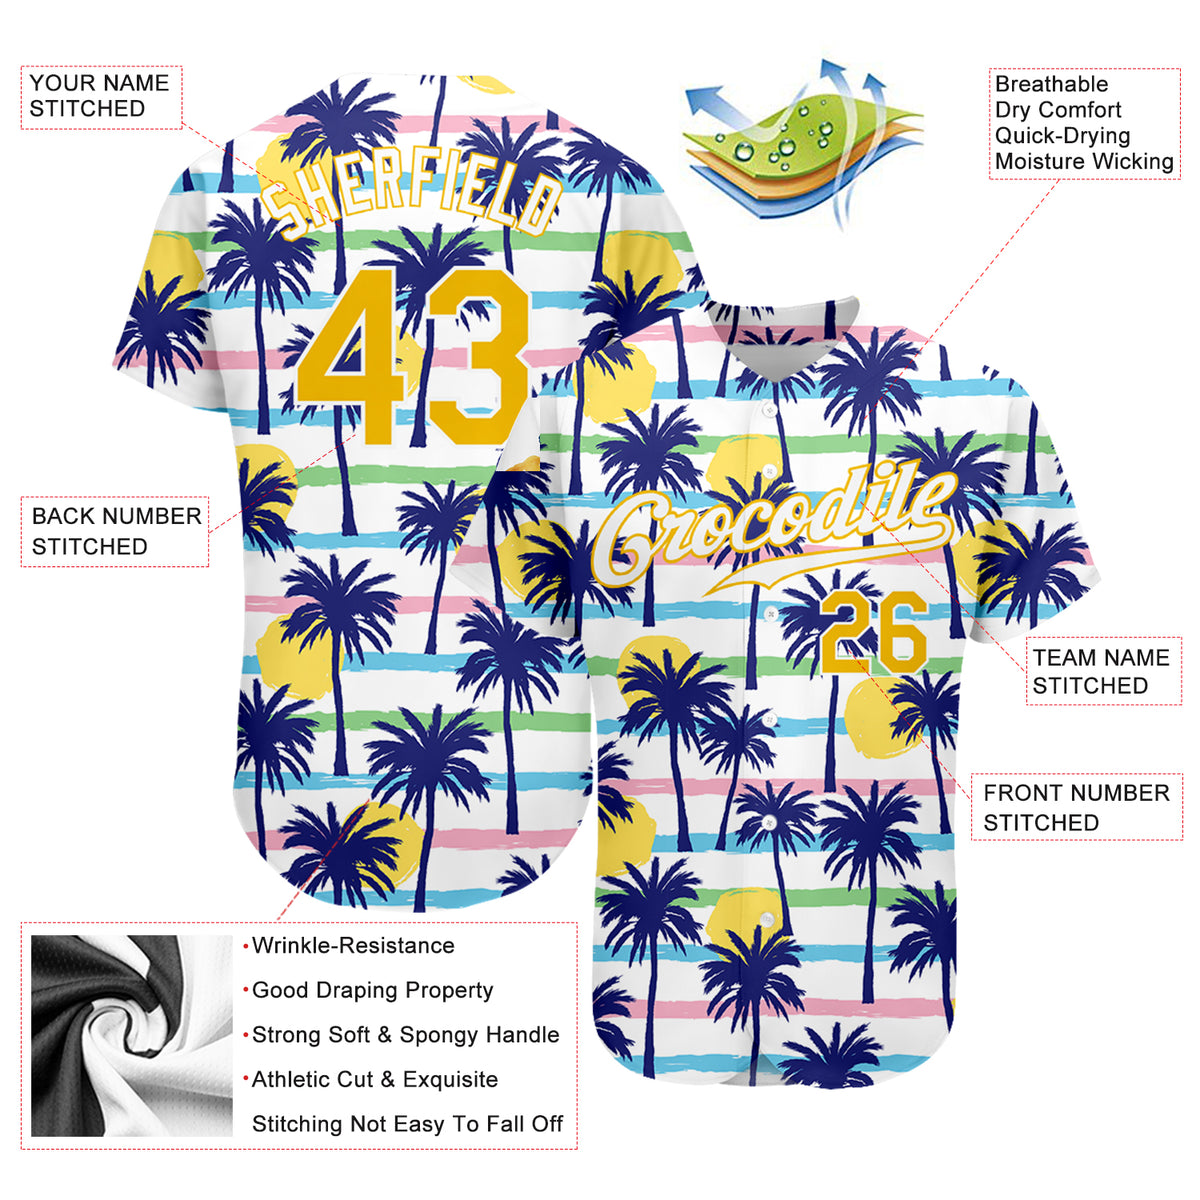 Custom Black Black-Pink 3D Pattern Design Tropical Palm Leaves Authentic Baseball Jersey Youth Size:M